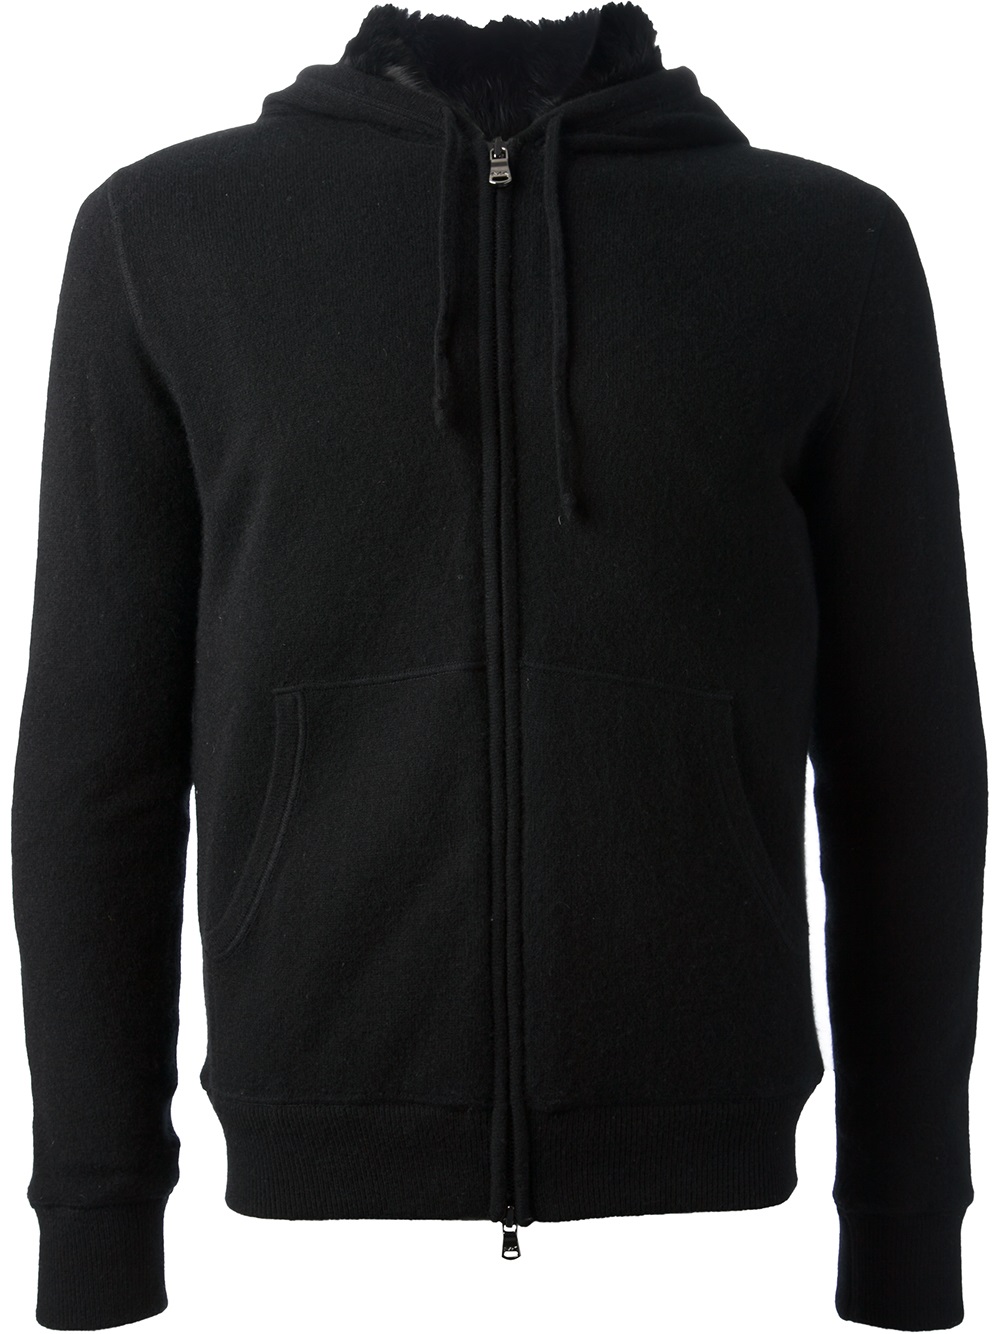 Michael Kors Cashmere Rabbit Lined Hoodie in Black for Men - Lyst